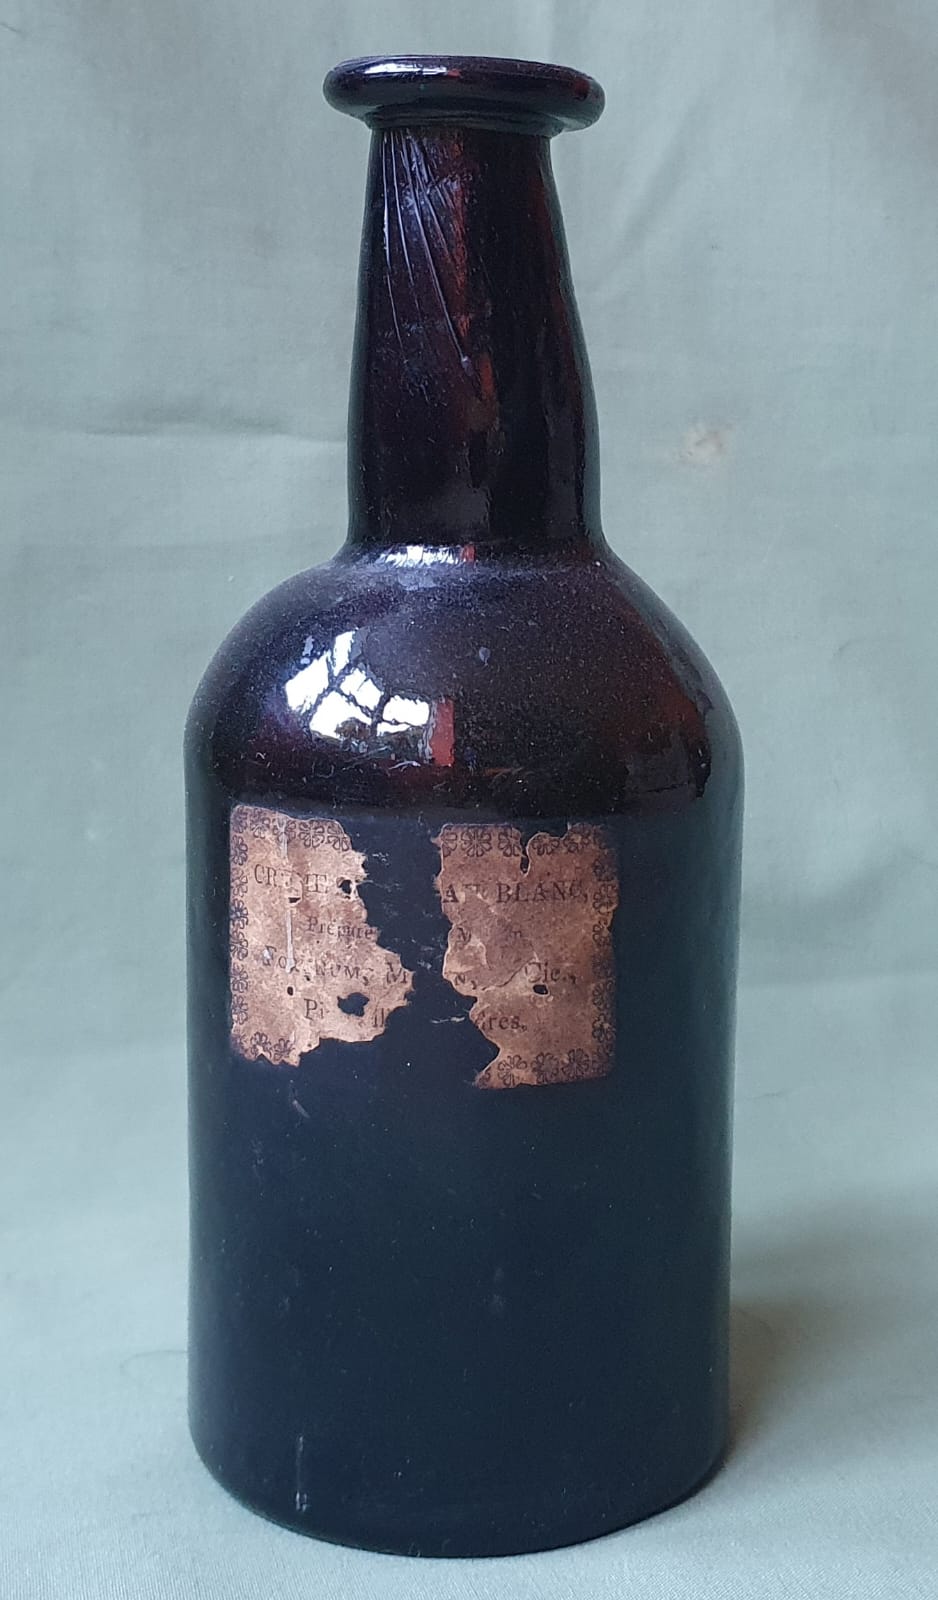 A glass bottle with remains of a paper label - Fortnum Mason, 8" high.